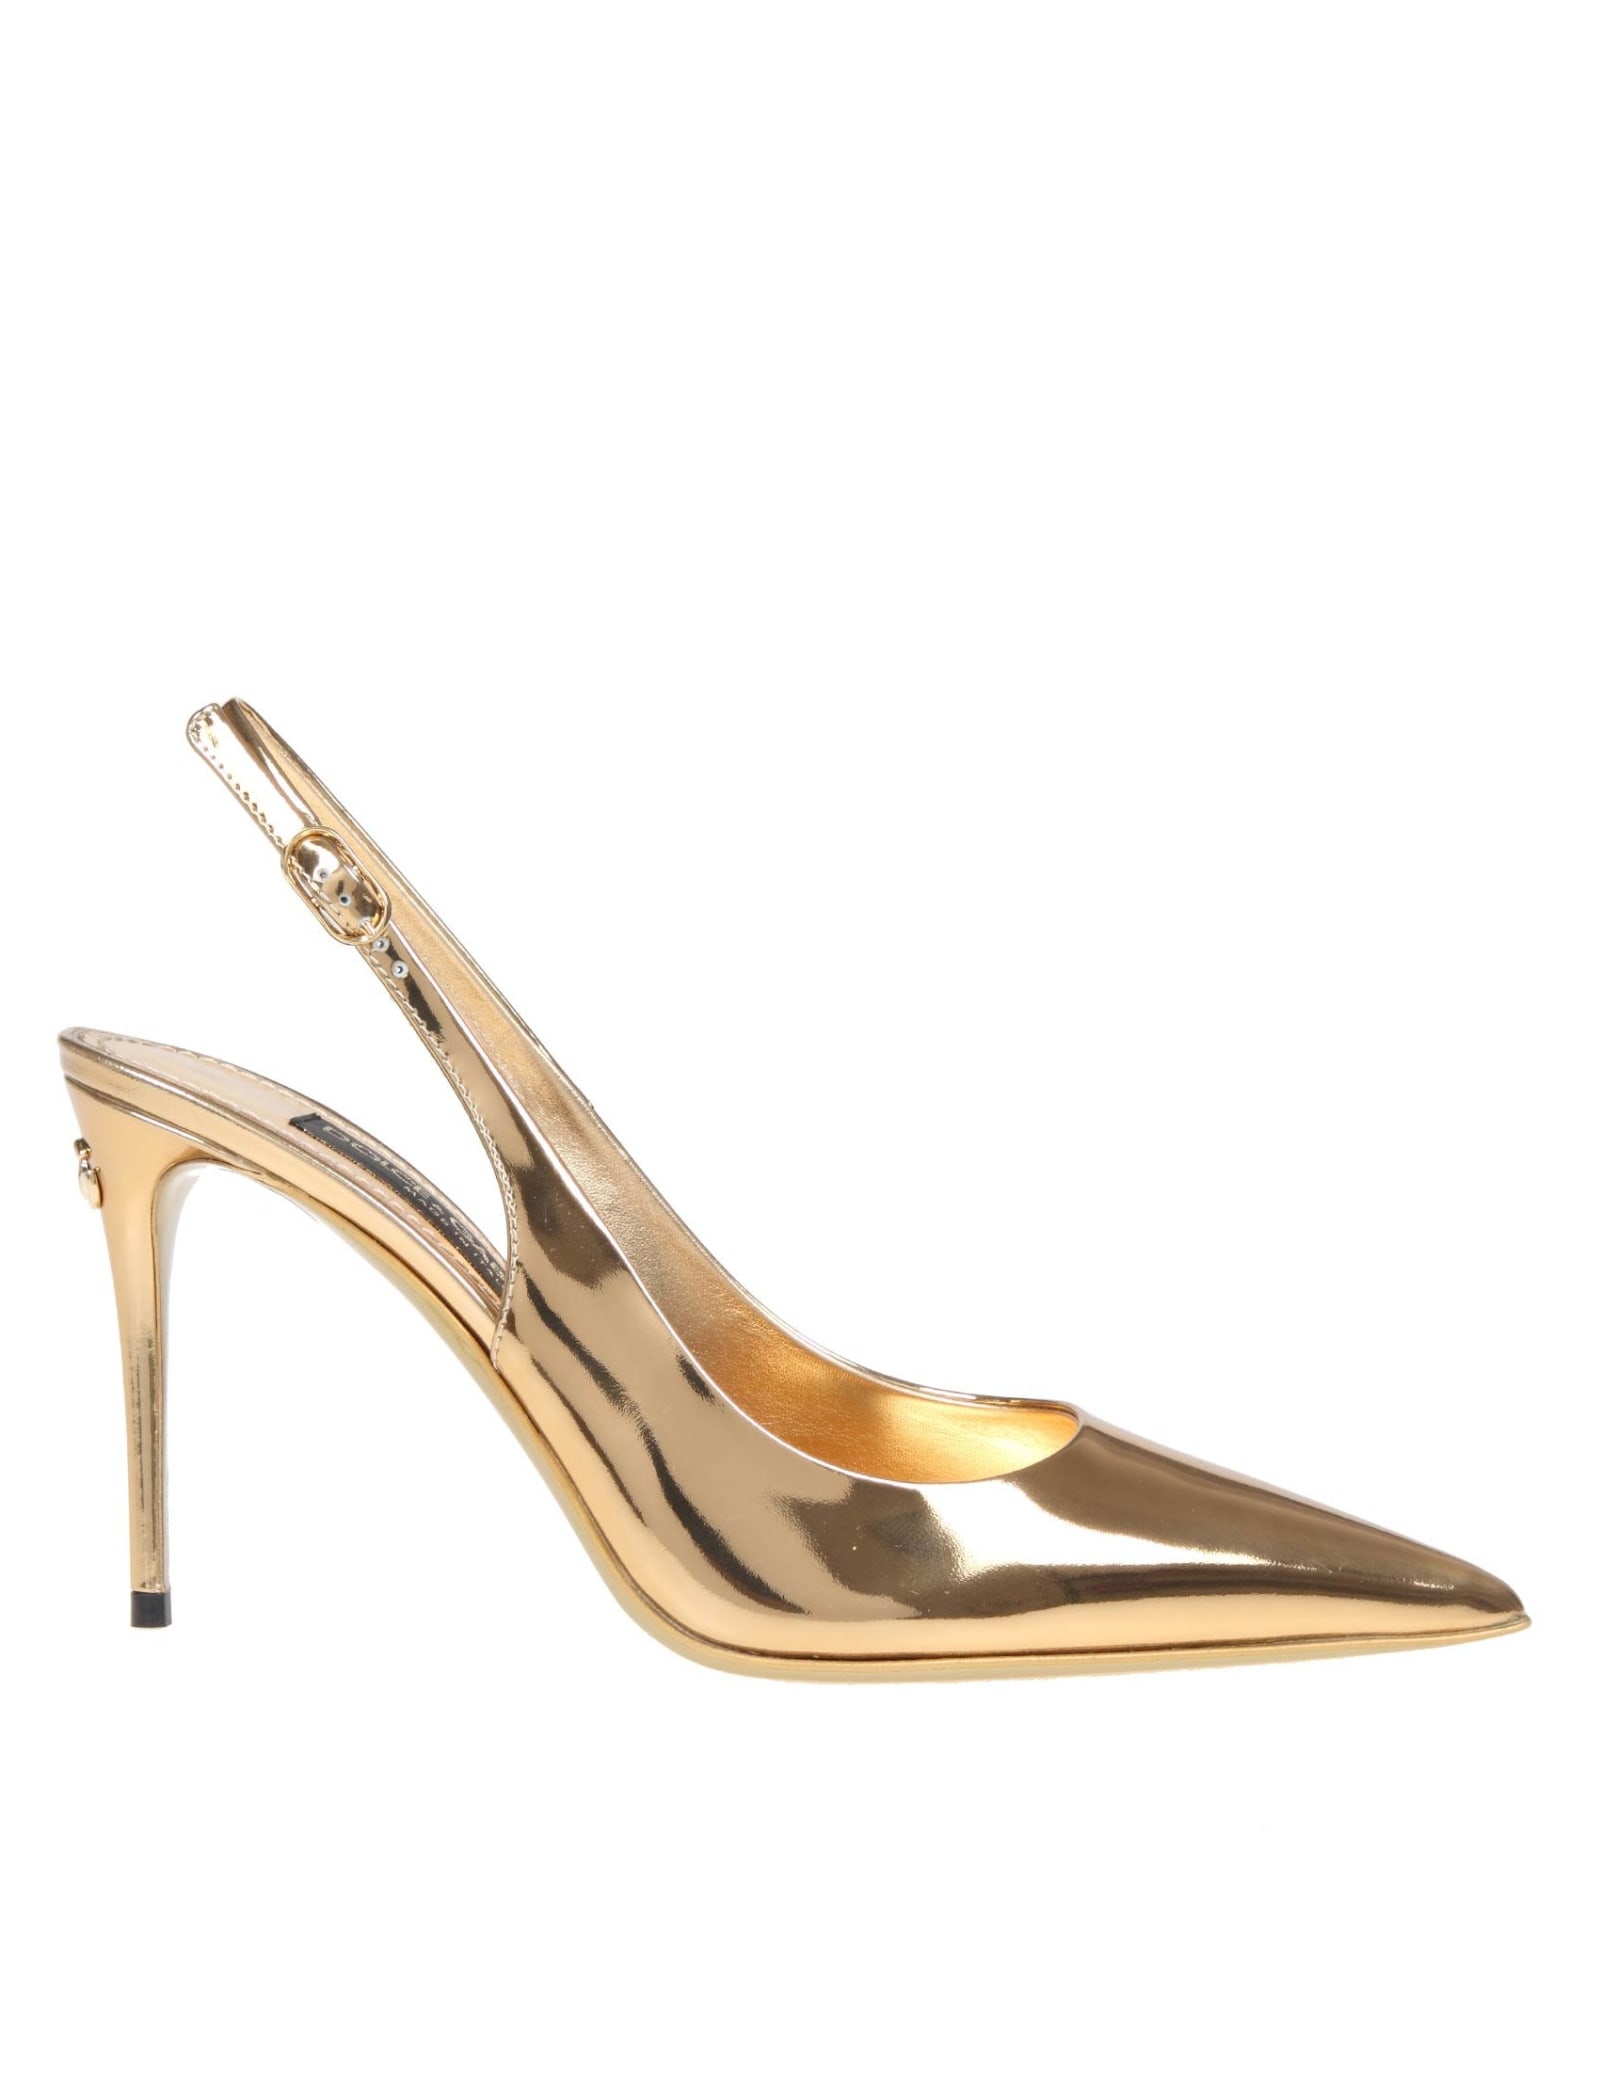 Dolce & Gabbana Slingback In Gold Mirror Leather In Light Gold